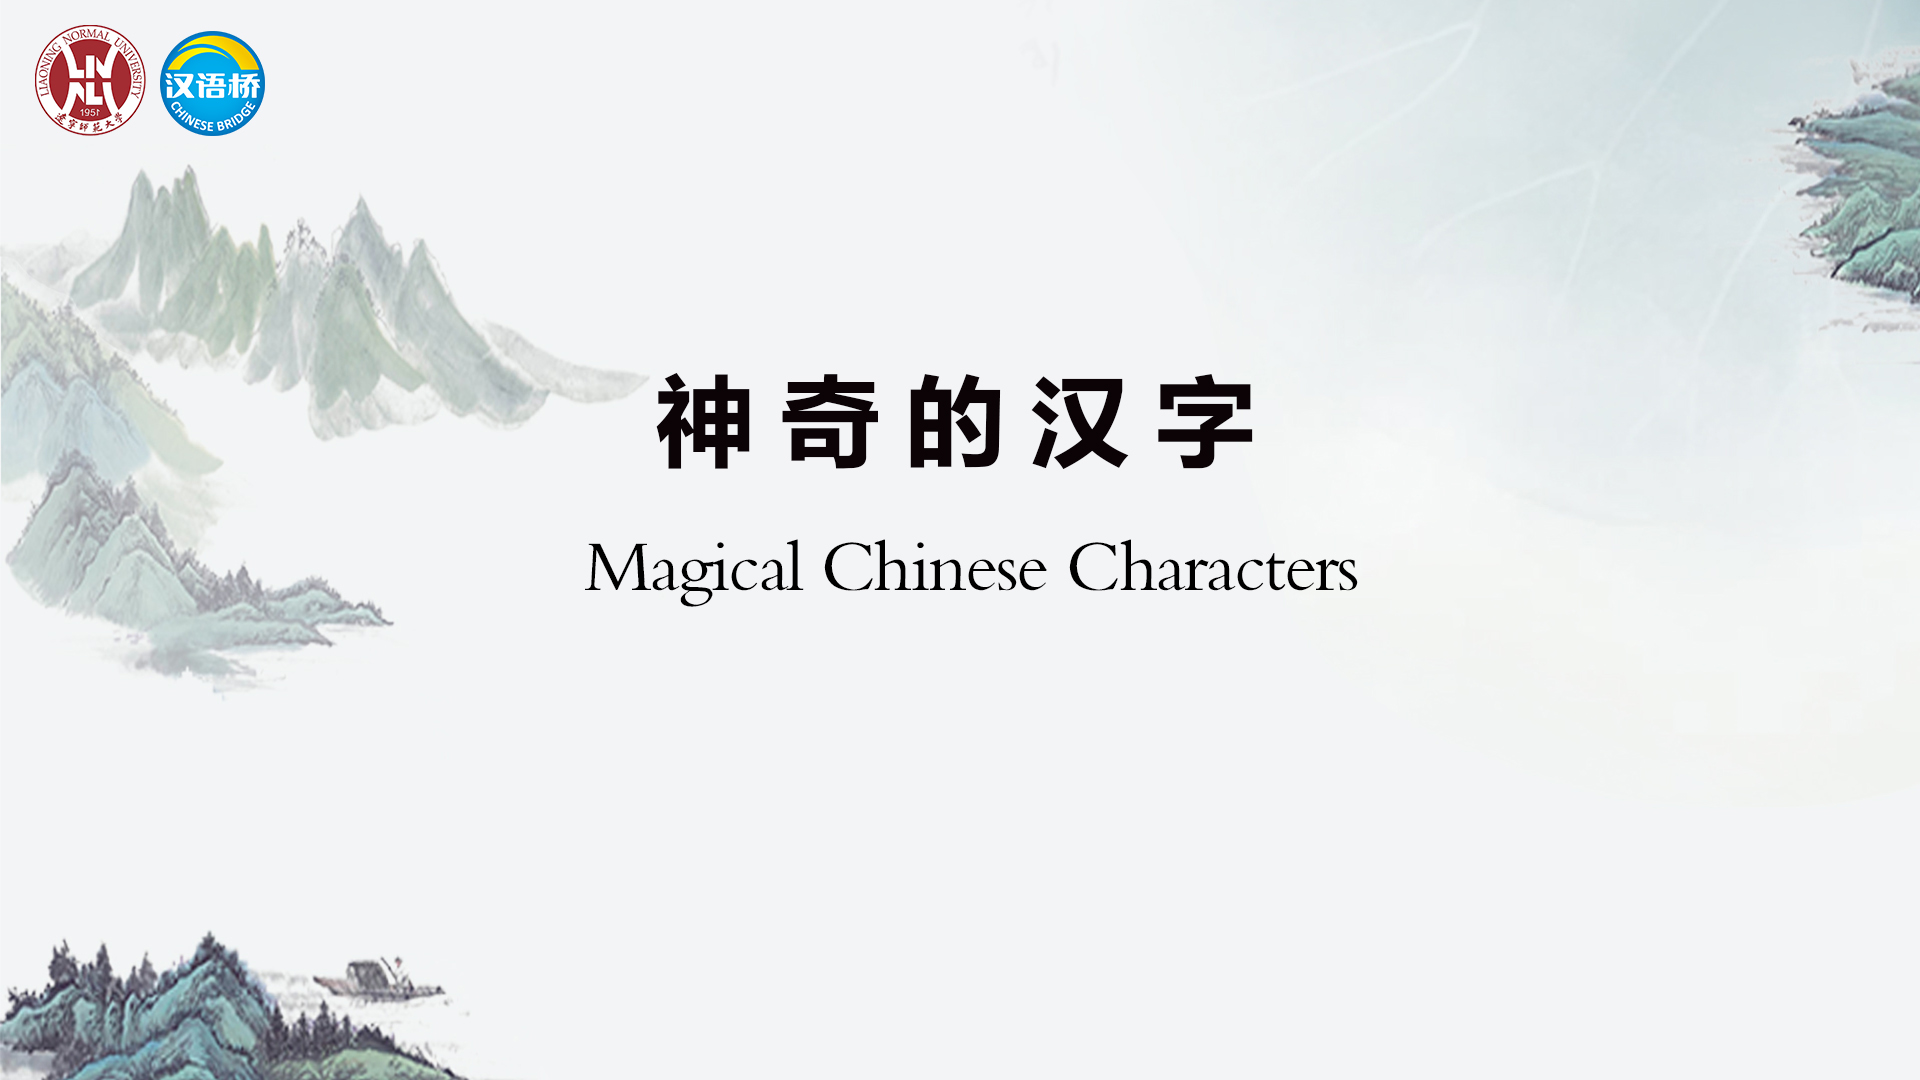 Magical Chinese Characters